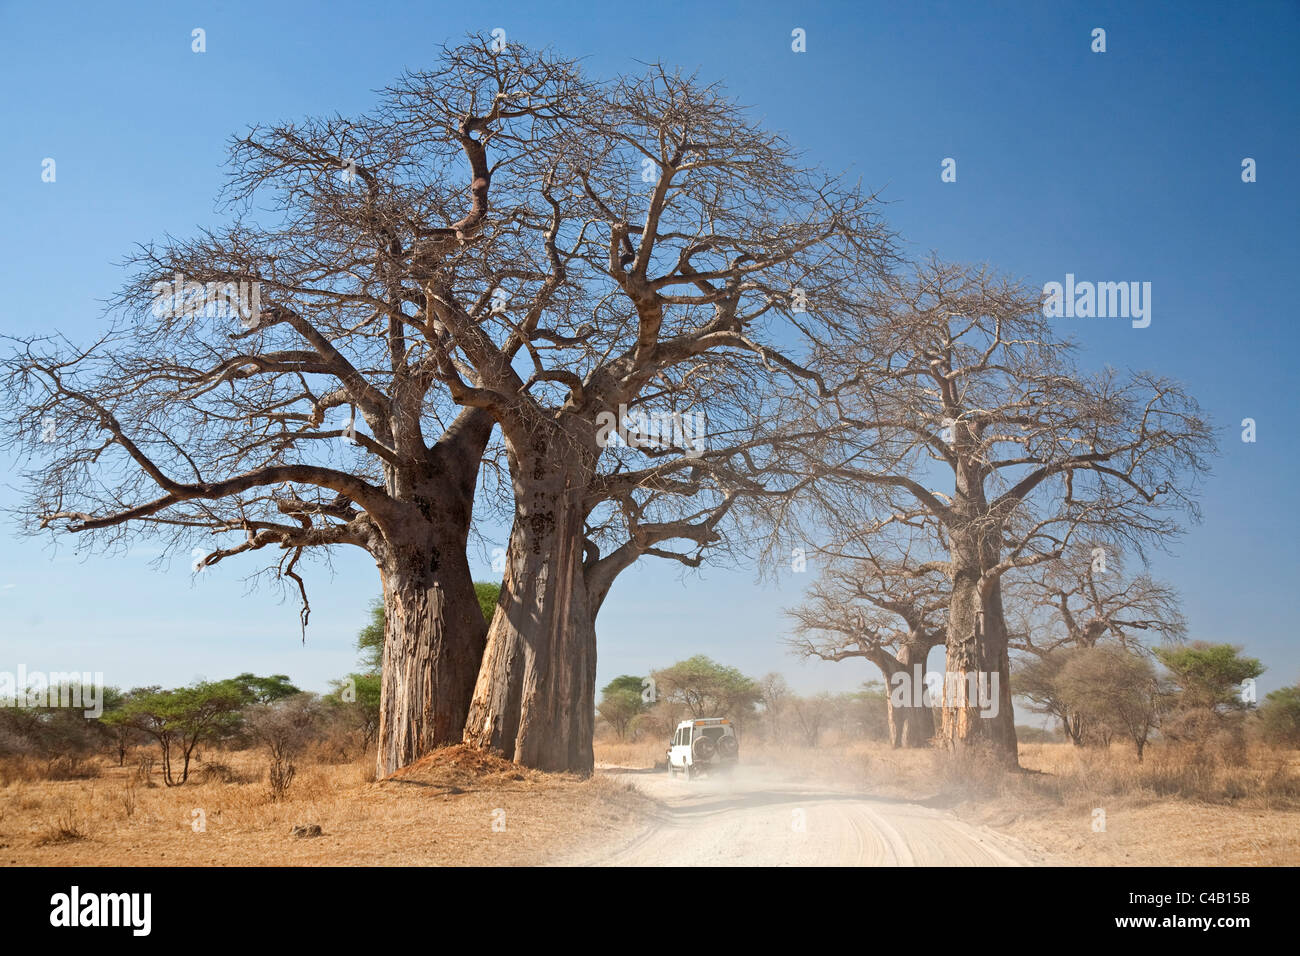 Tanzania, Tarangire. A road runs underneath the branches of massive baobab trees, for which Tarangire is famous. Stock Photo